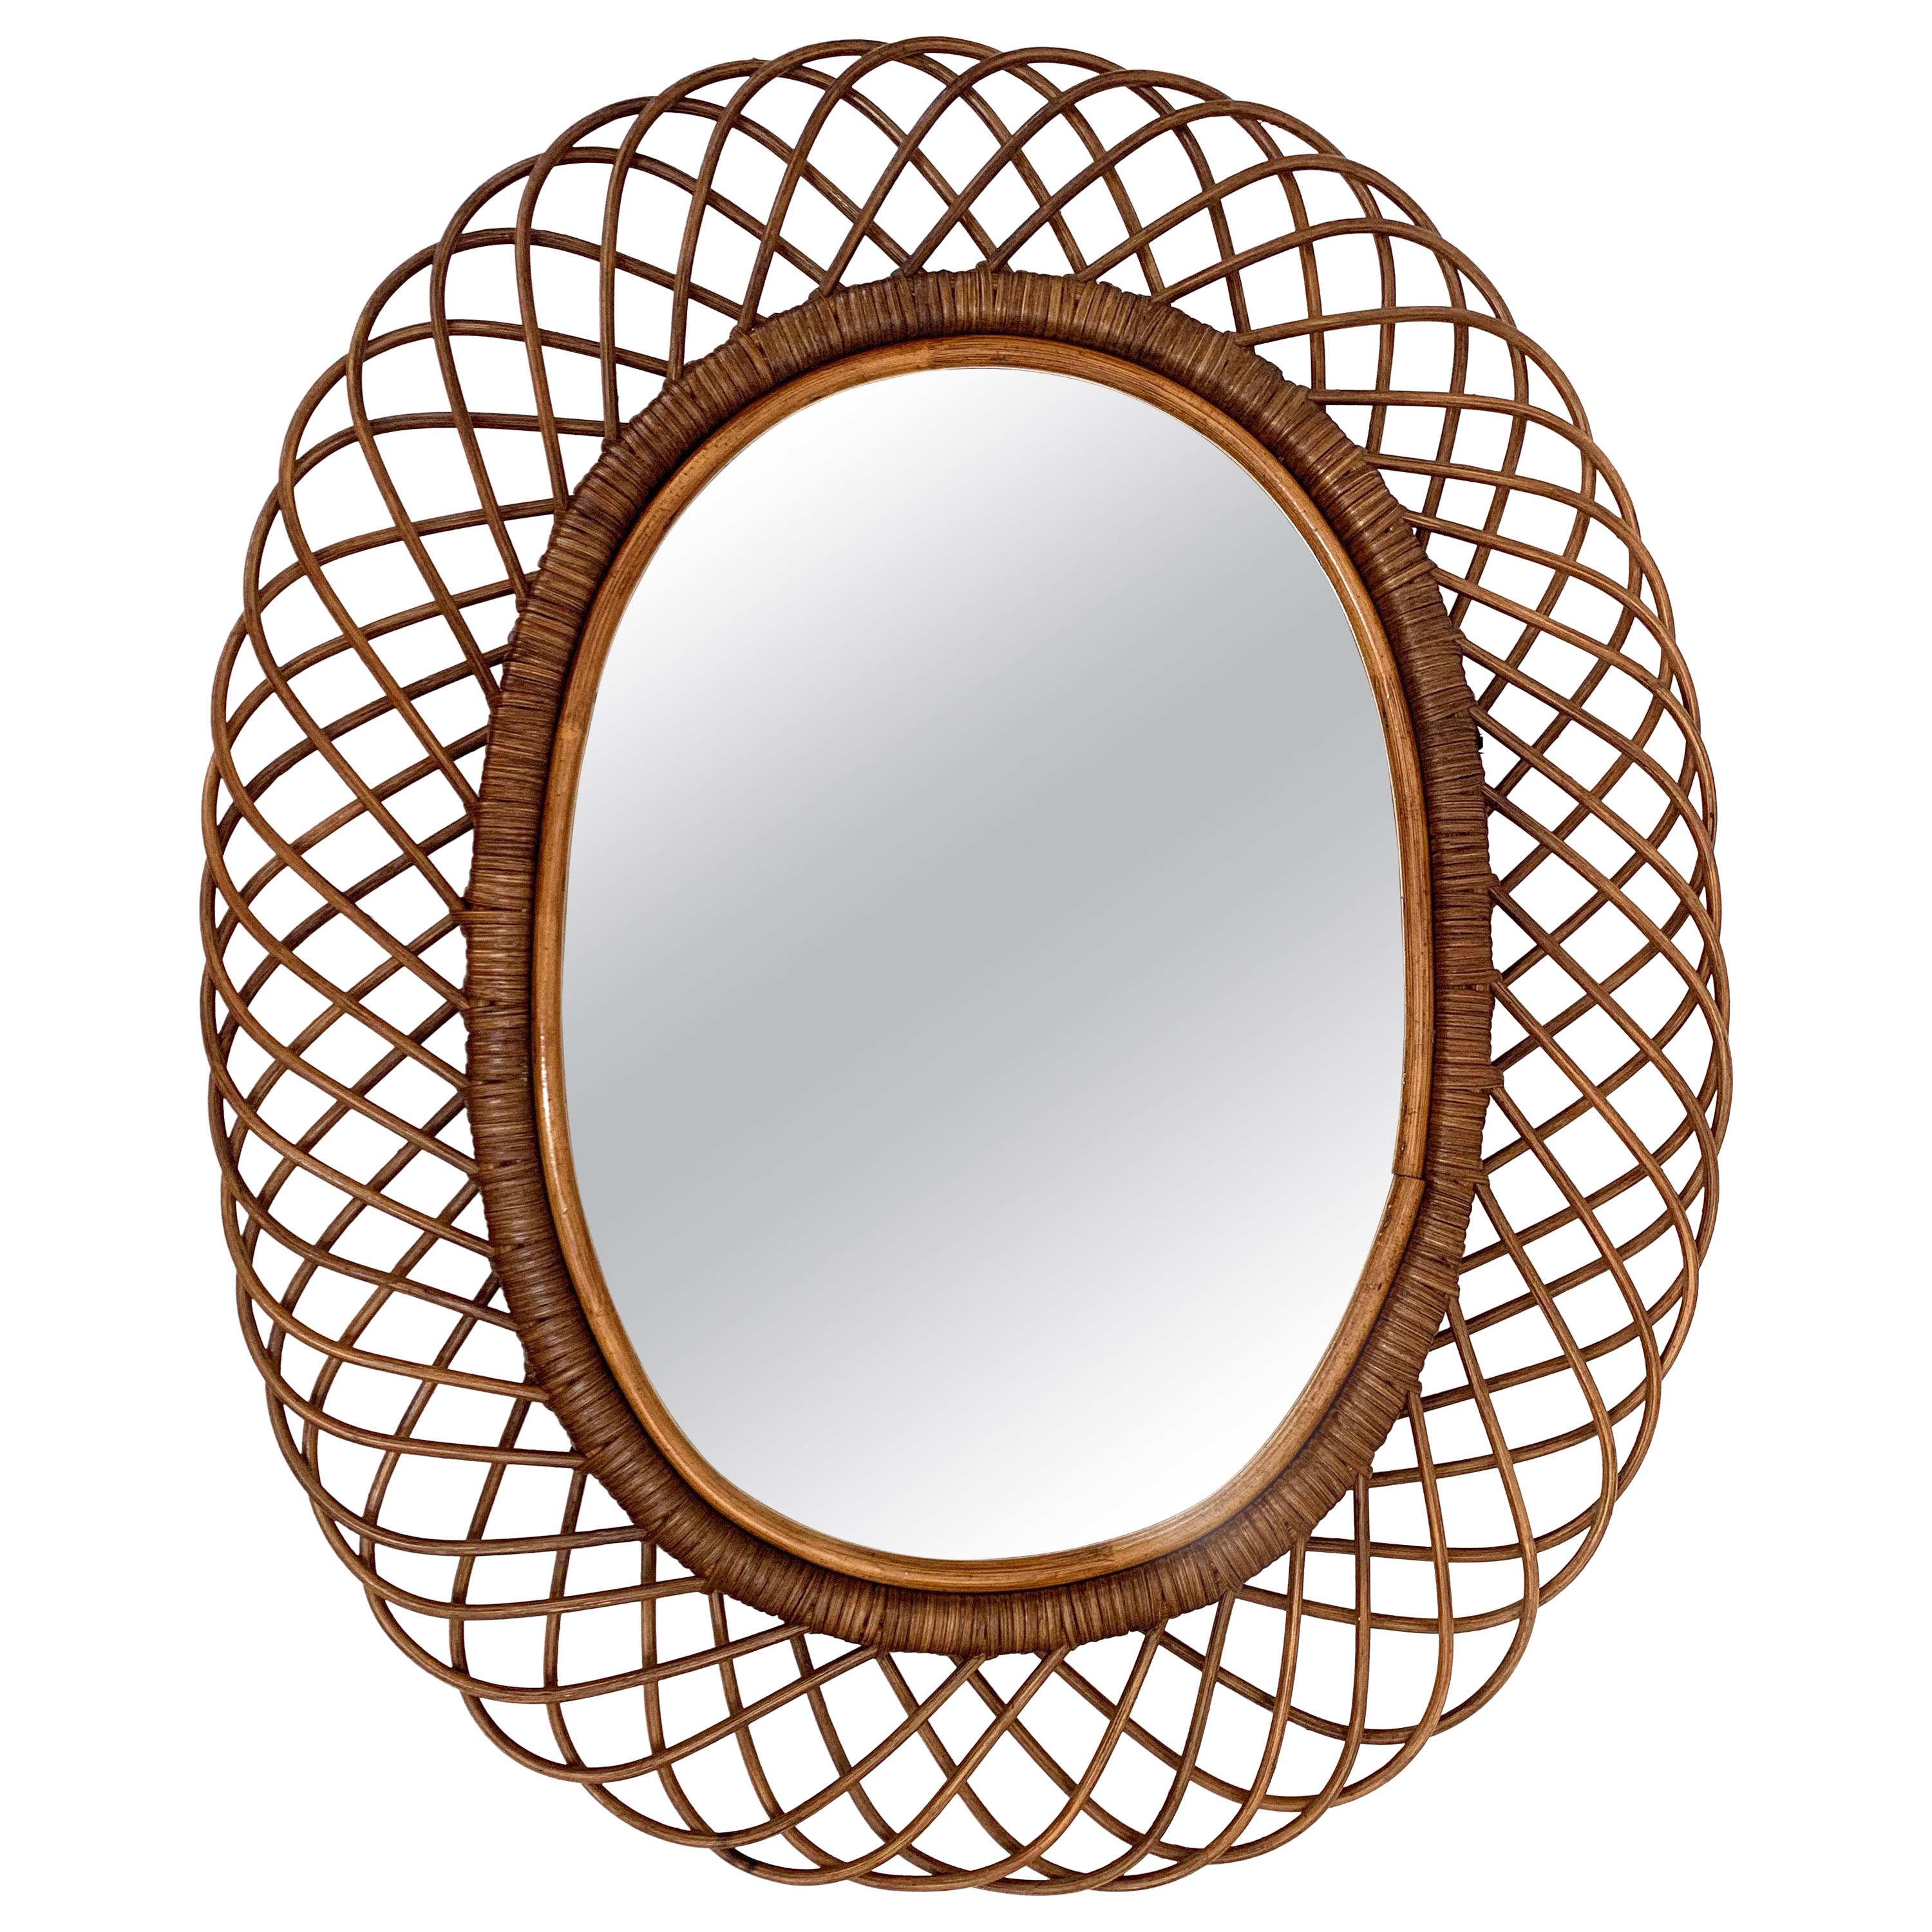 Midcentury French Riviera Curved Rattan and Bamboo Italian Oval Mirror, 1960s